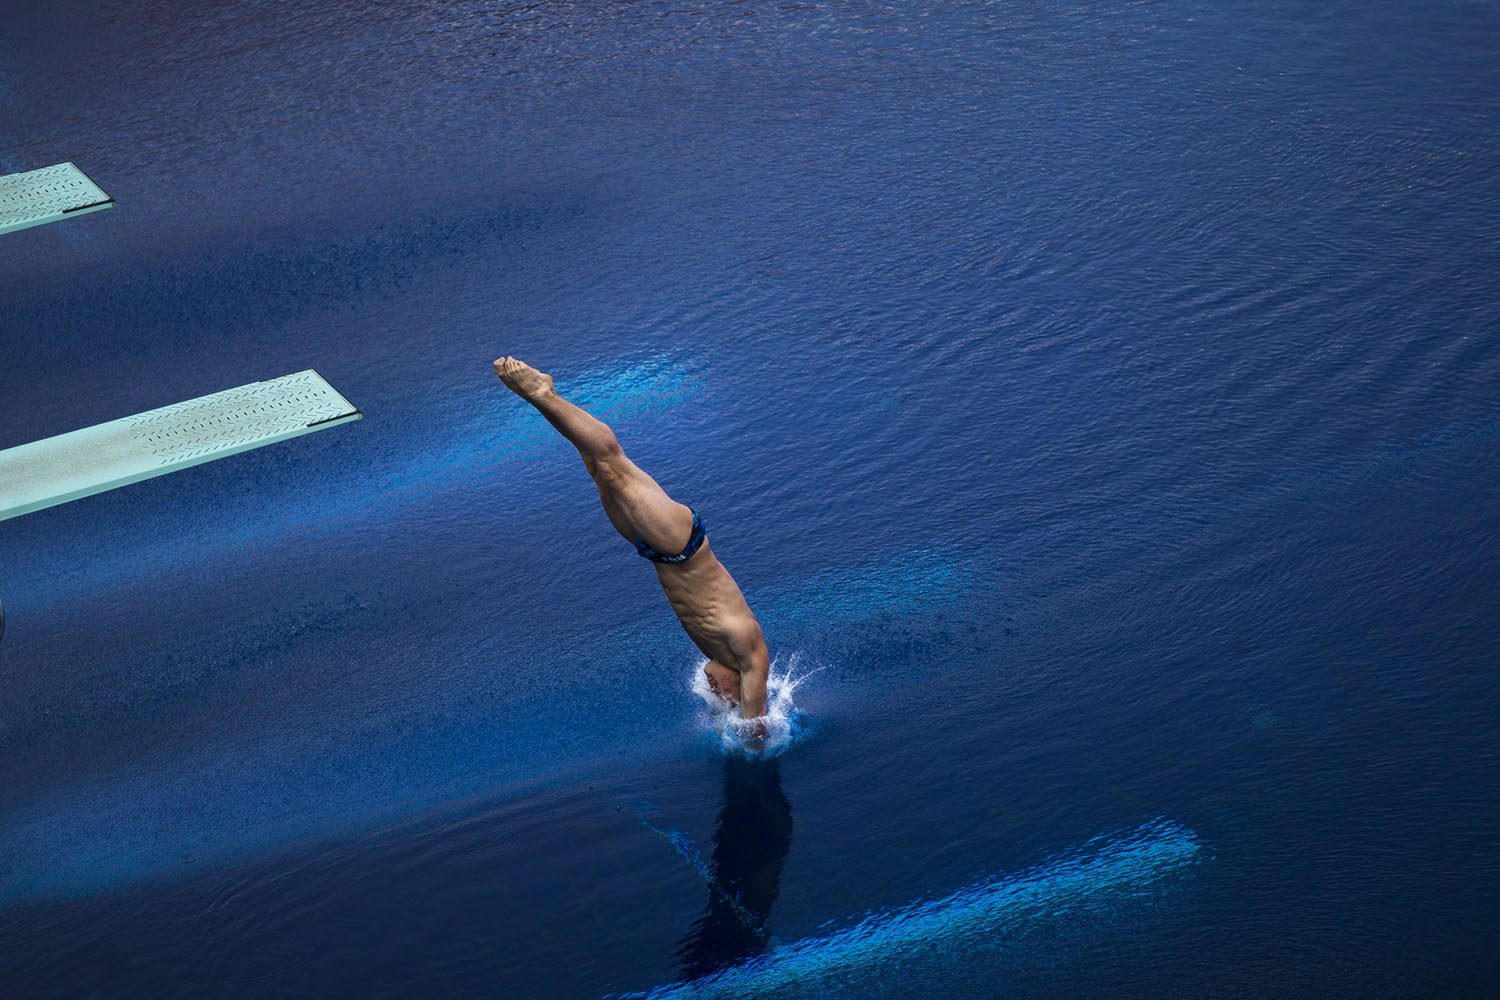 July 26, 2013. Silver medalist Evgeny Kuznetsov from Russia performs during the men's 3-meter springboard final at the FINA Swimming World Championships in Barcelona, Spain.